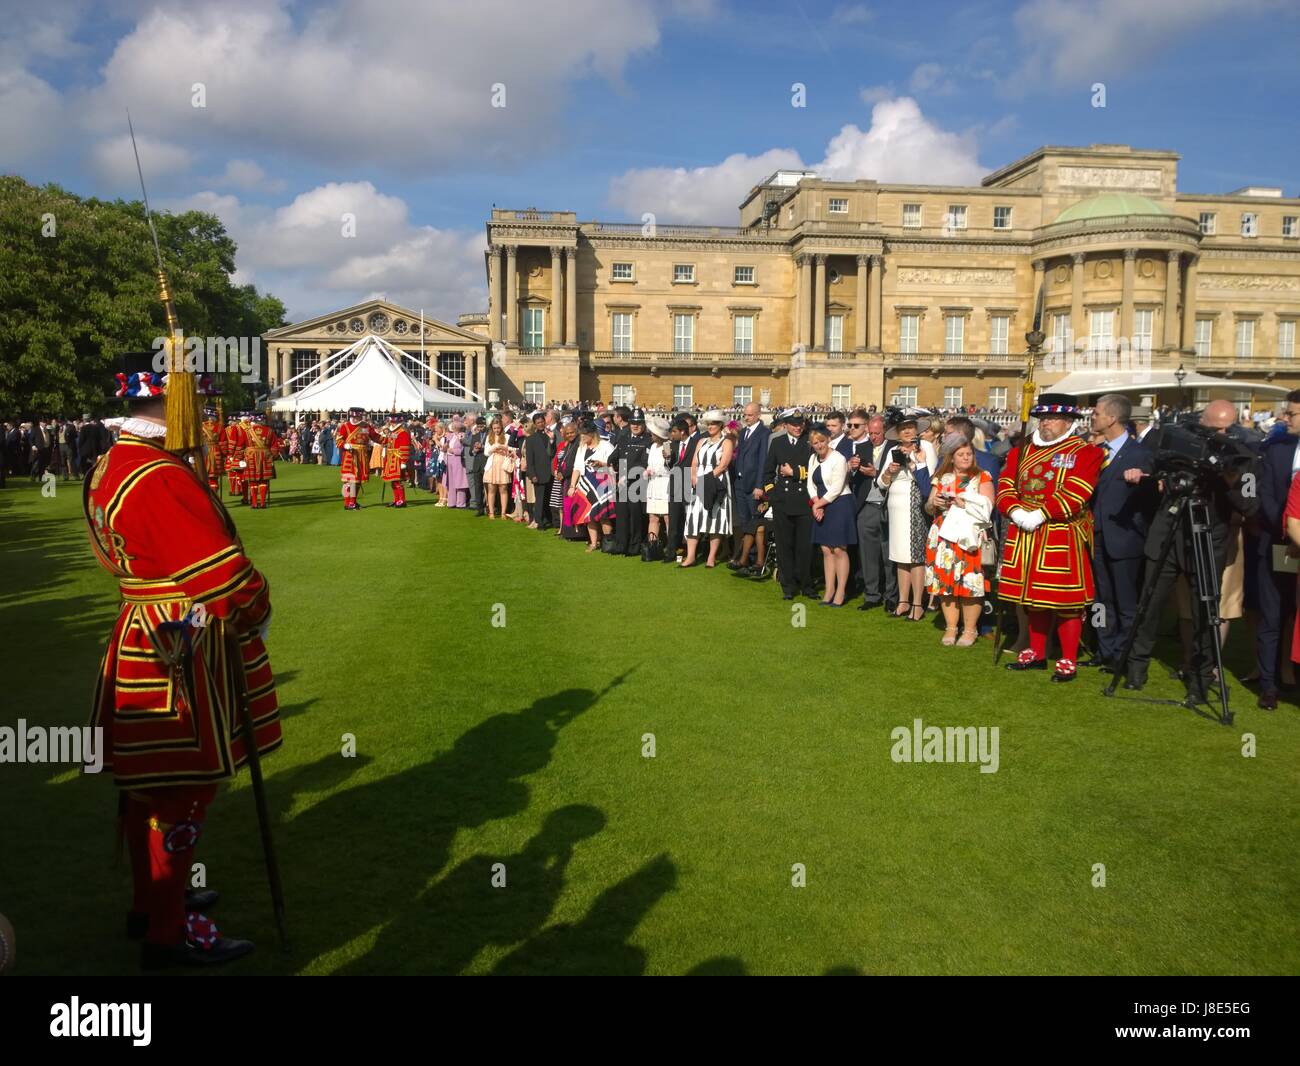 The Buckingham Palace Garden Party 2017, photos taken on 23rd May 2017  Stock Photo - Alamy